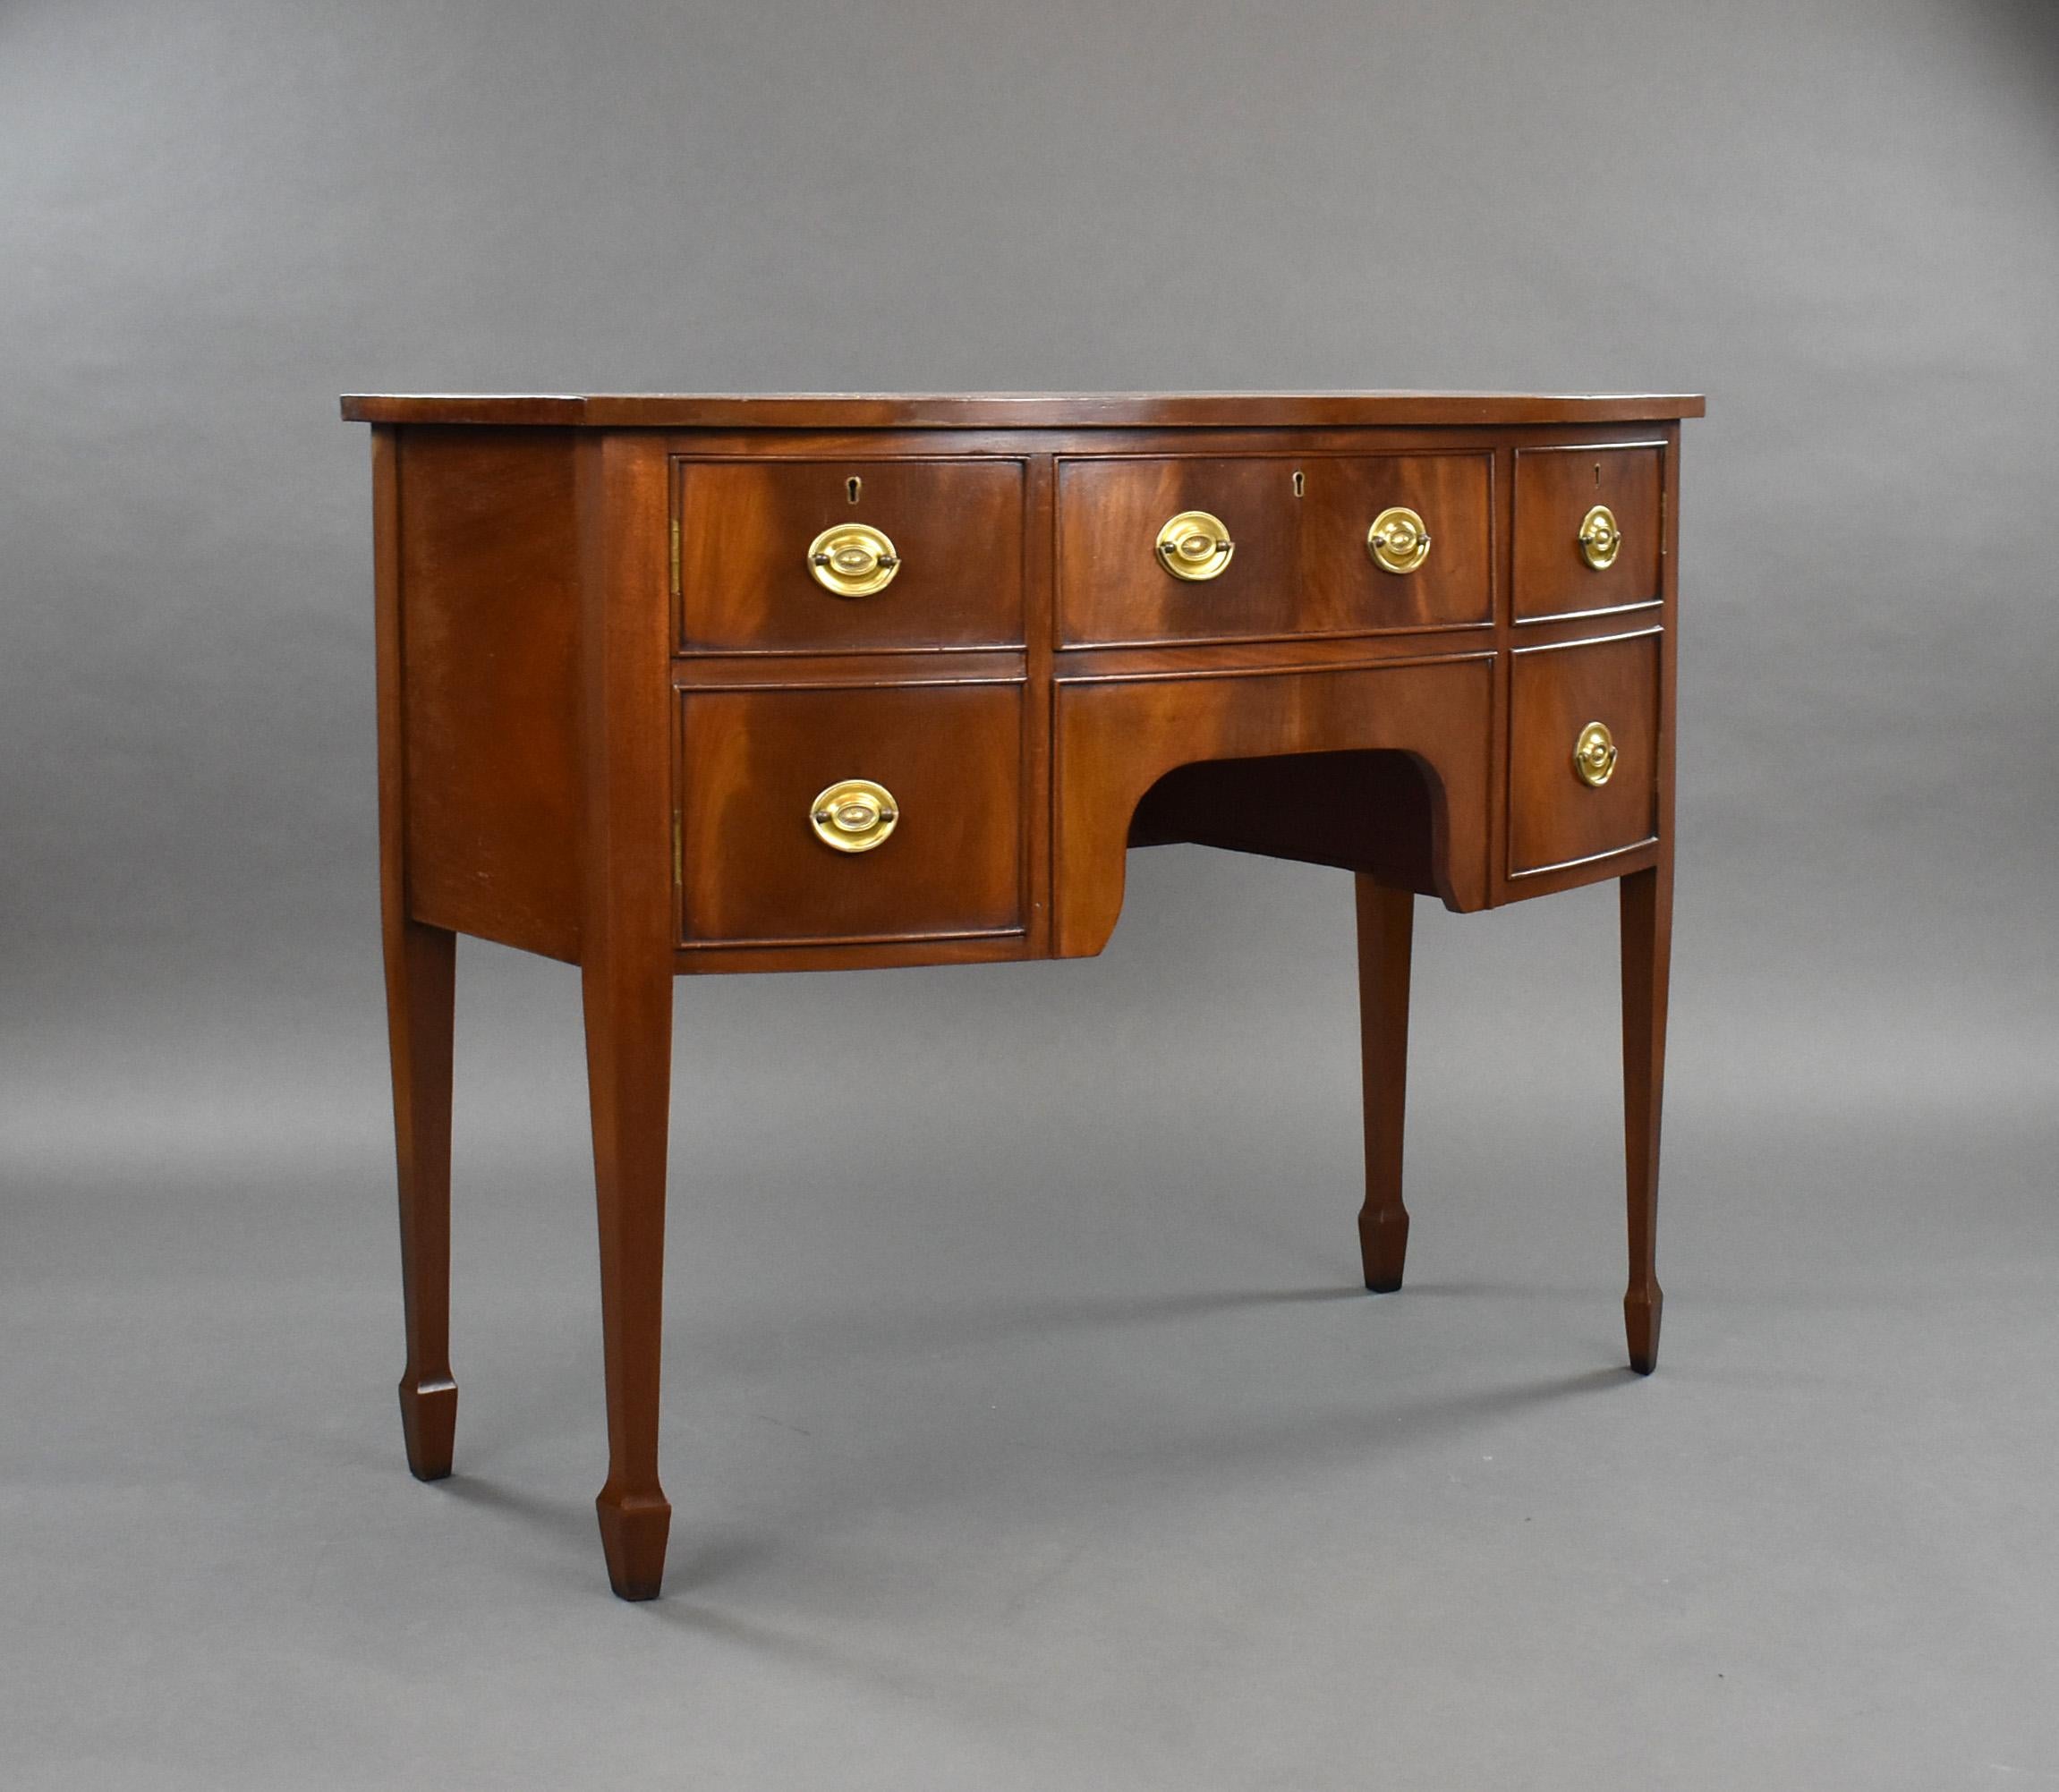 For sale is an Edwardian mahogany bow front sideboard, having a drawer to the centre with a cupboard on either side. Standing on tapered legs terminating on spade feet, the sideboard remains in very good condition for its age. 

Measures: width: